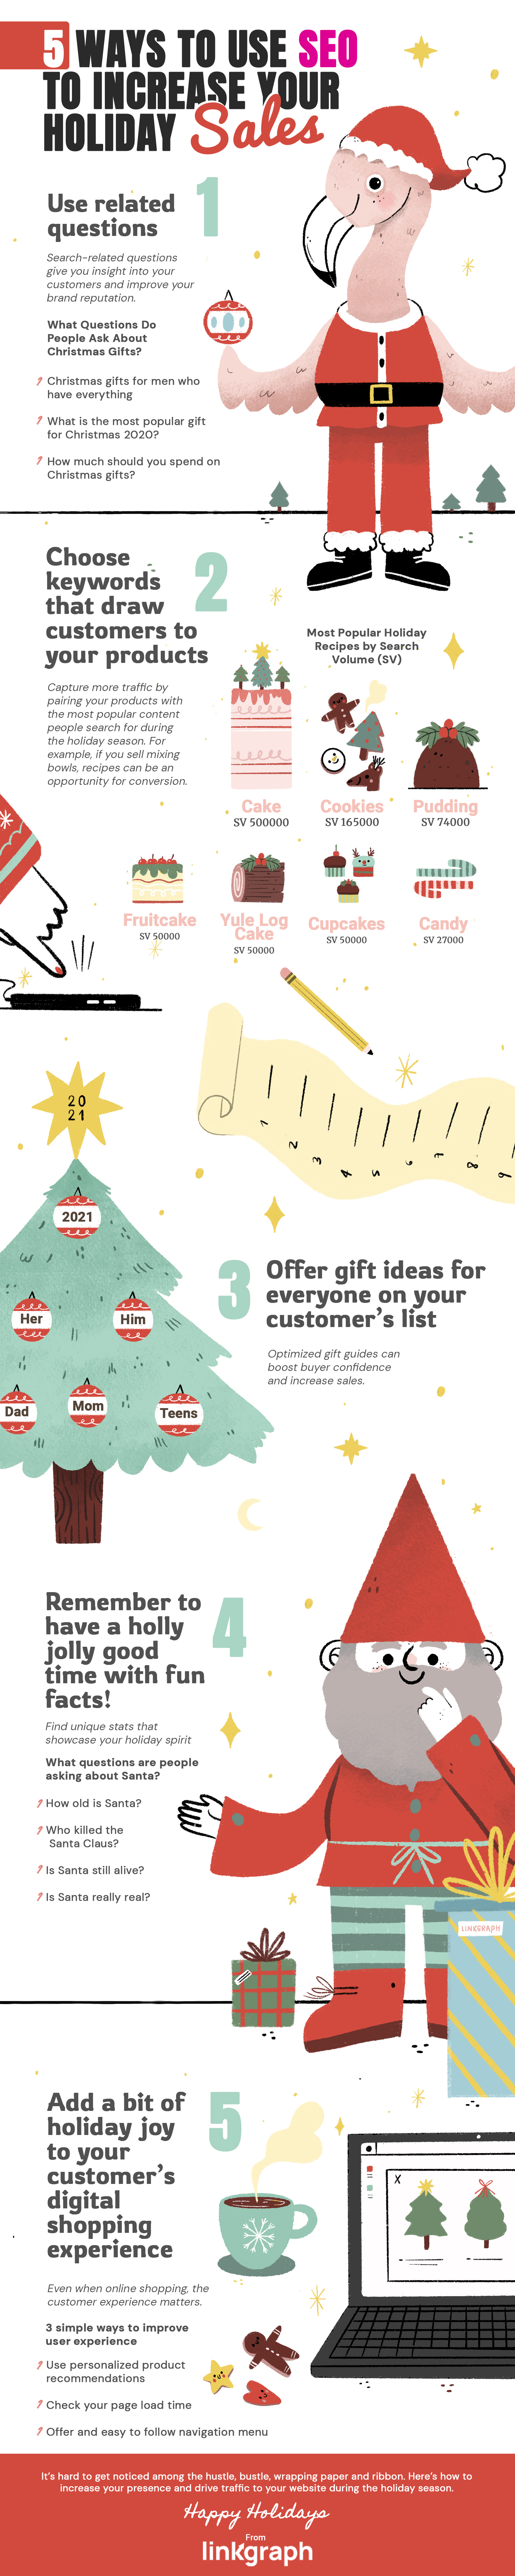 Increase holiday sales infographic with a holiday theme, 5 tips listed (repeat in the article) and holiday graphics